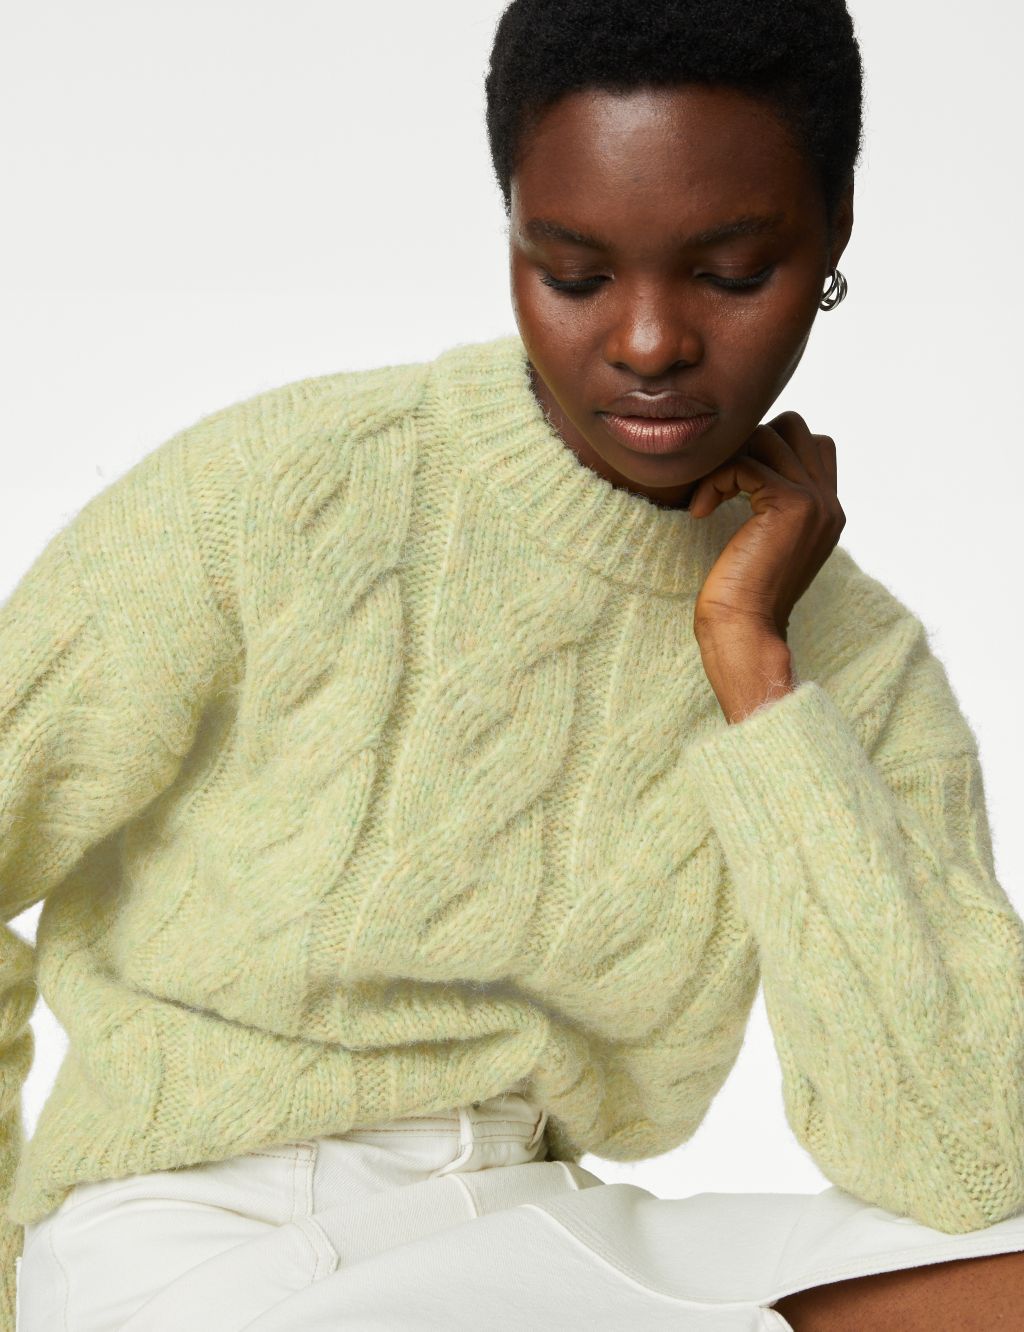 Cable Knit Crew Neck Jumper image 1